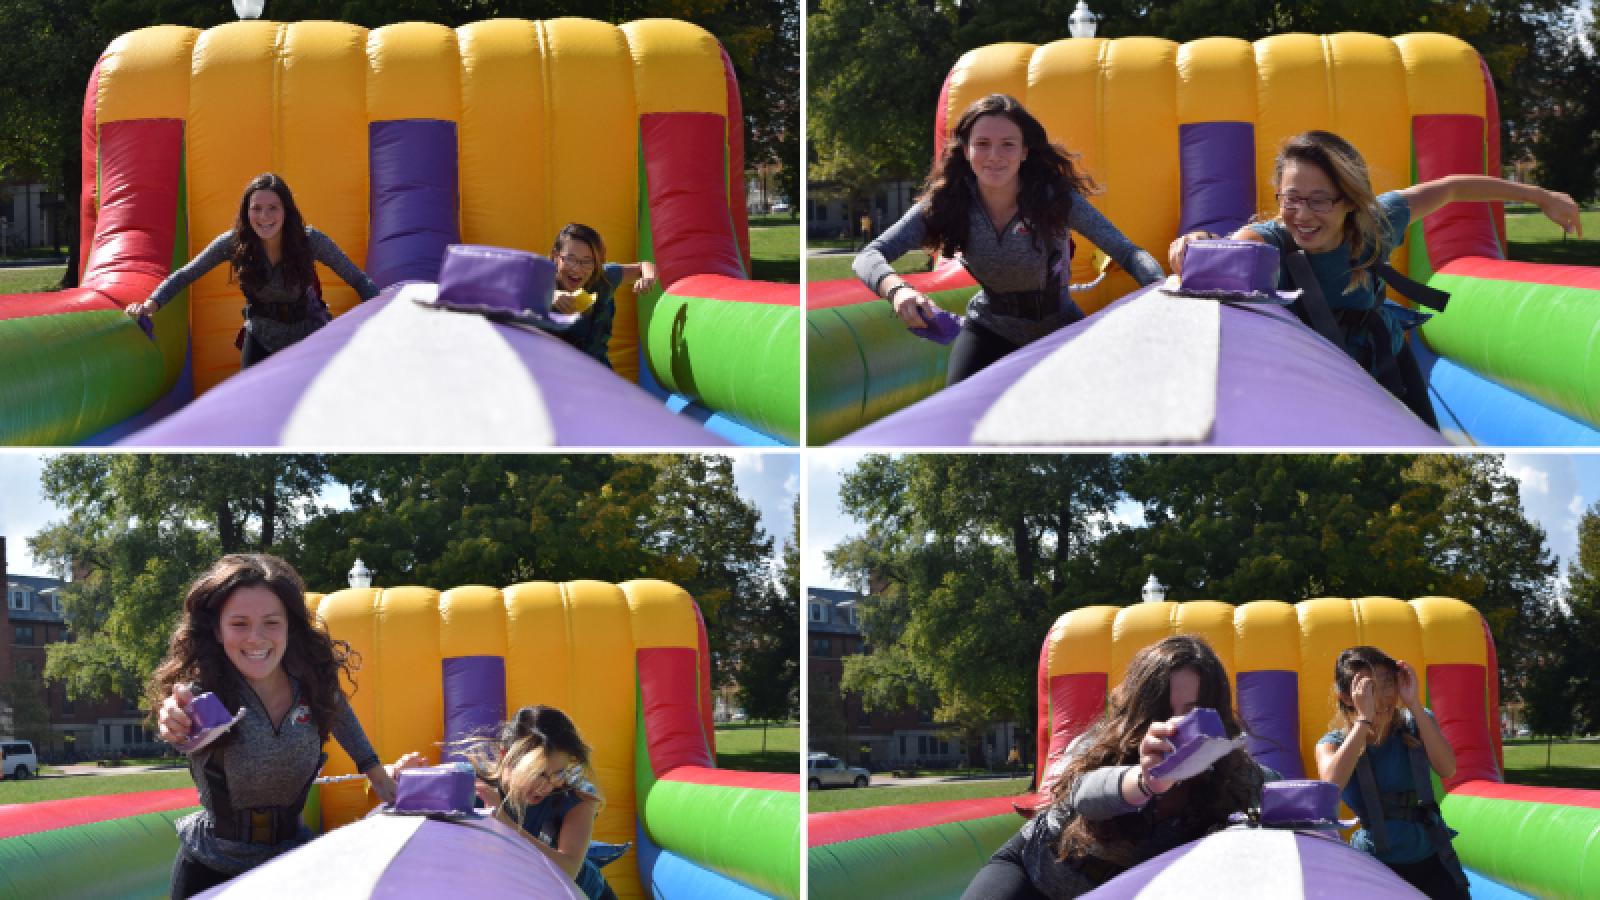 Students playing on inflatable at field day 